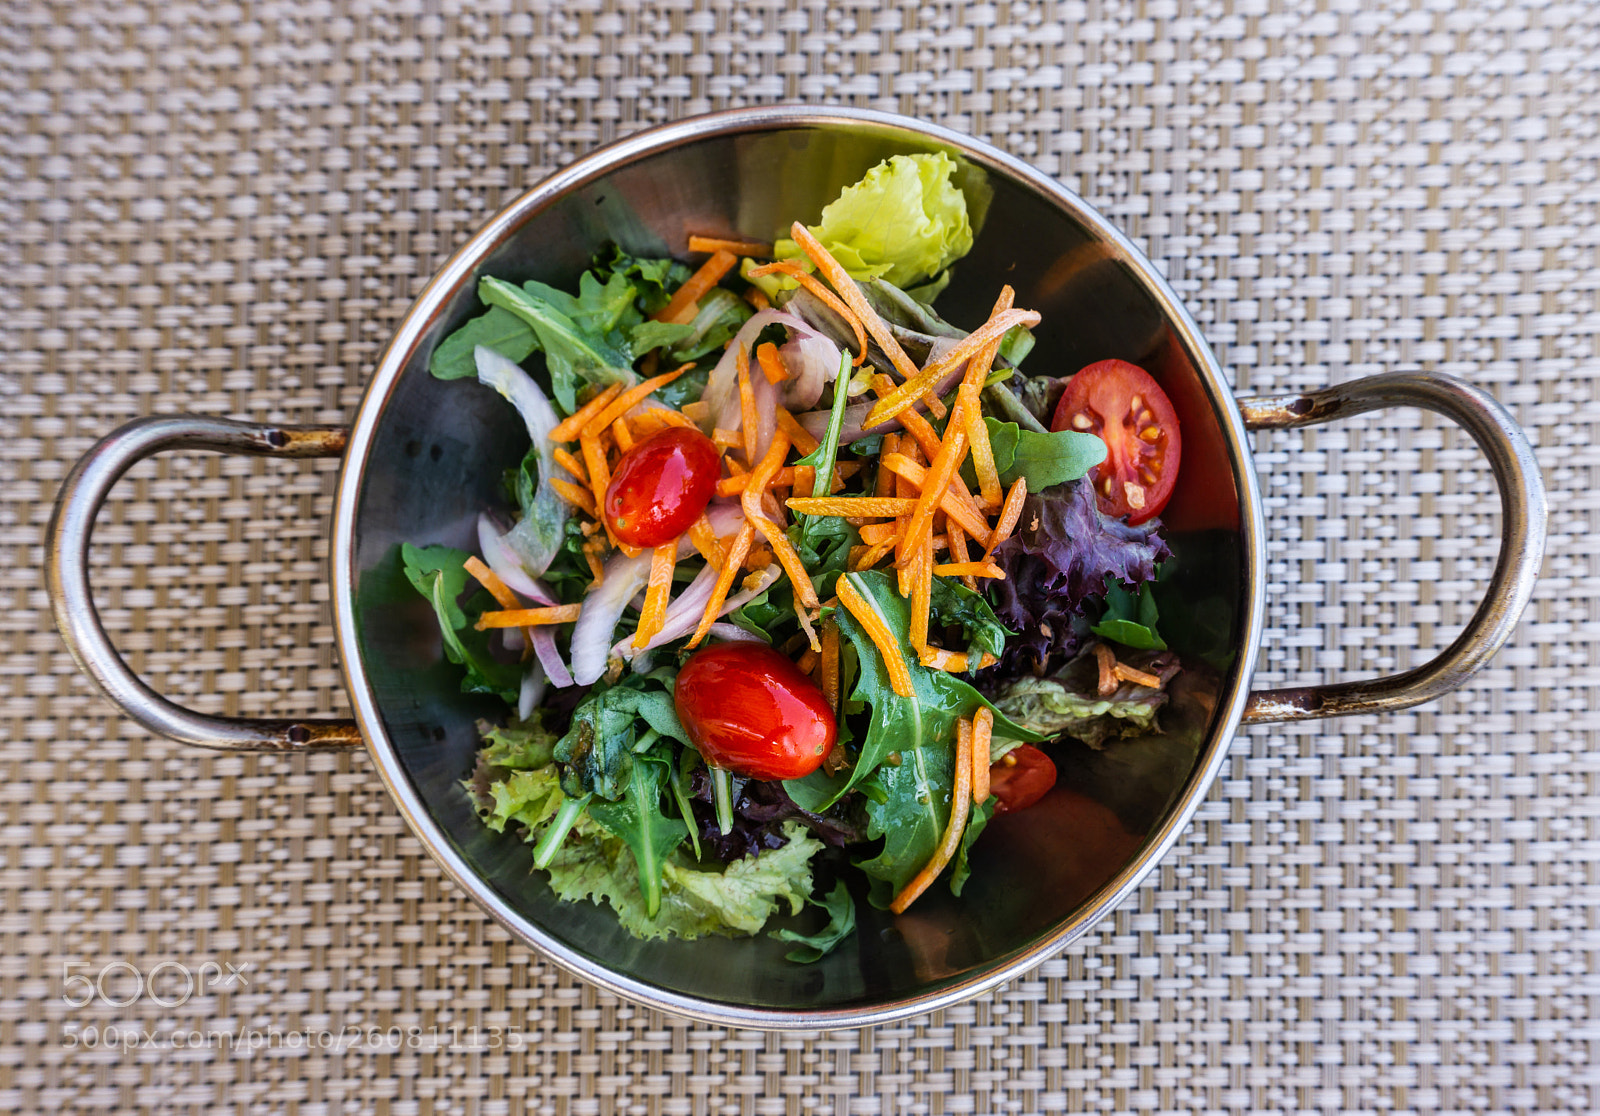 Sony a6000 sample photo. Fresh salad - delicious photography